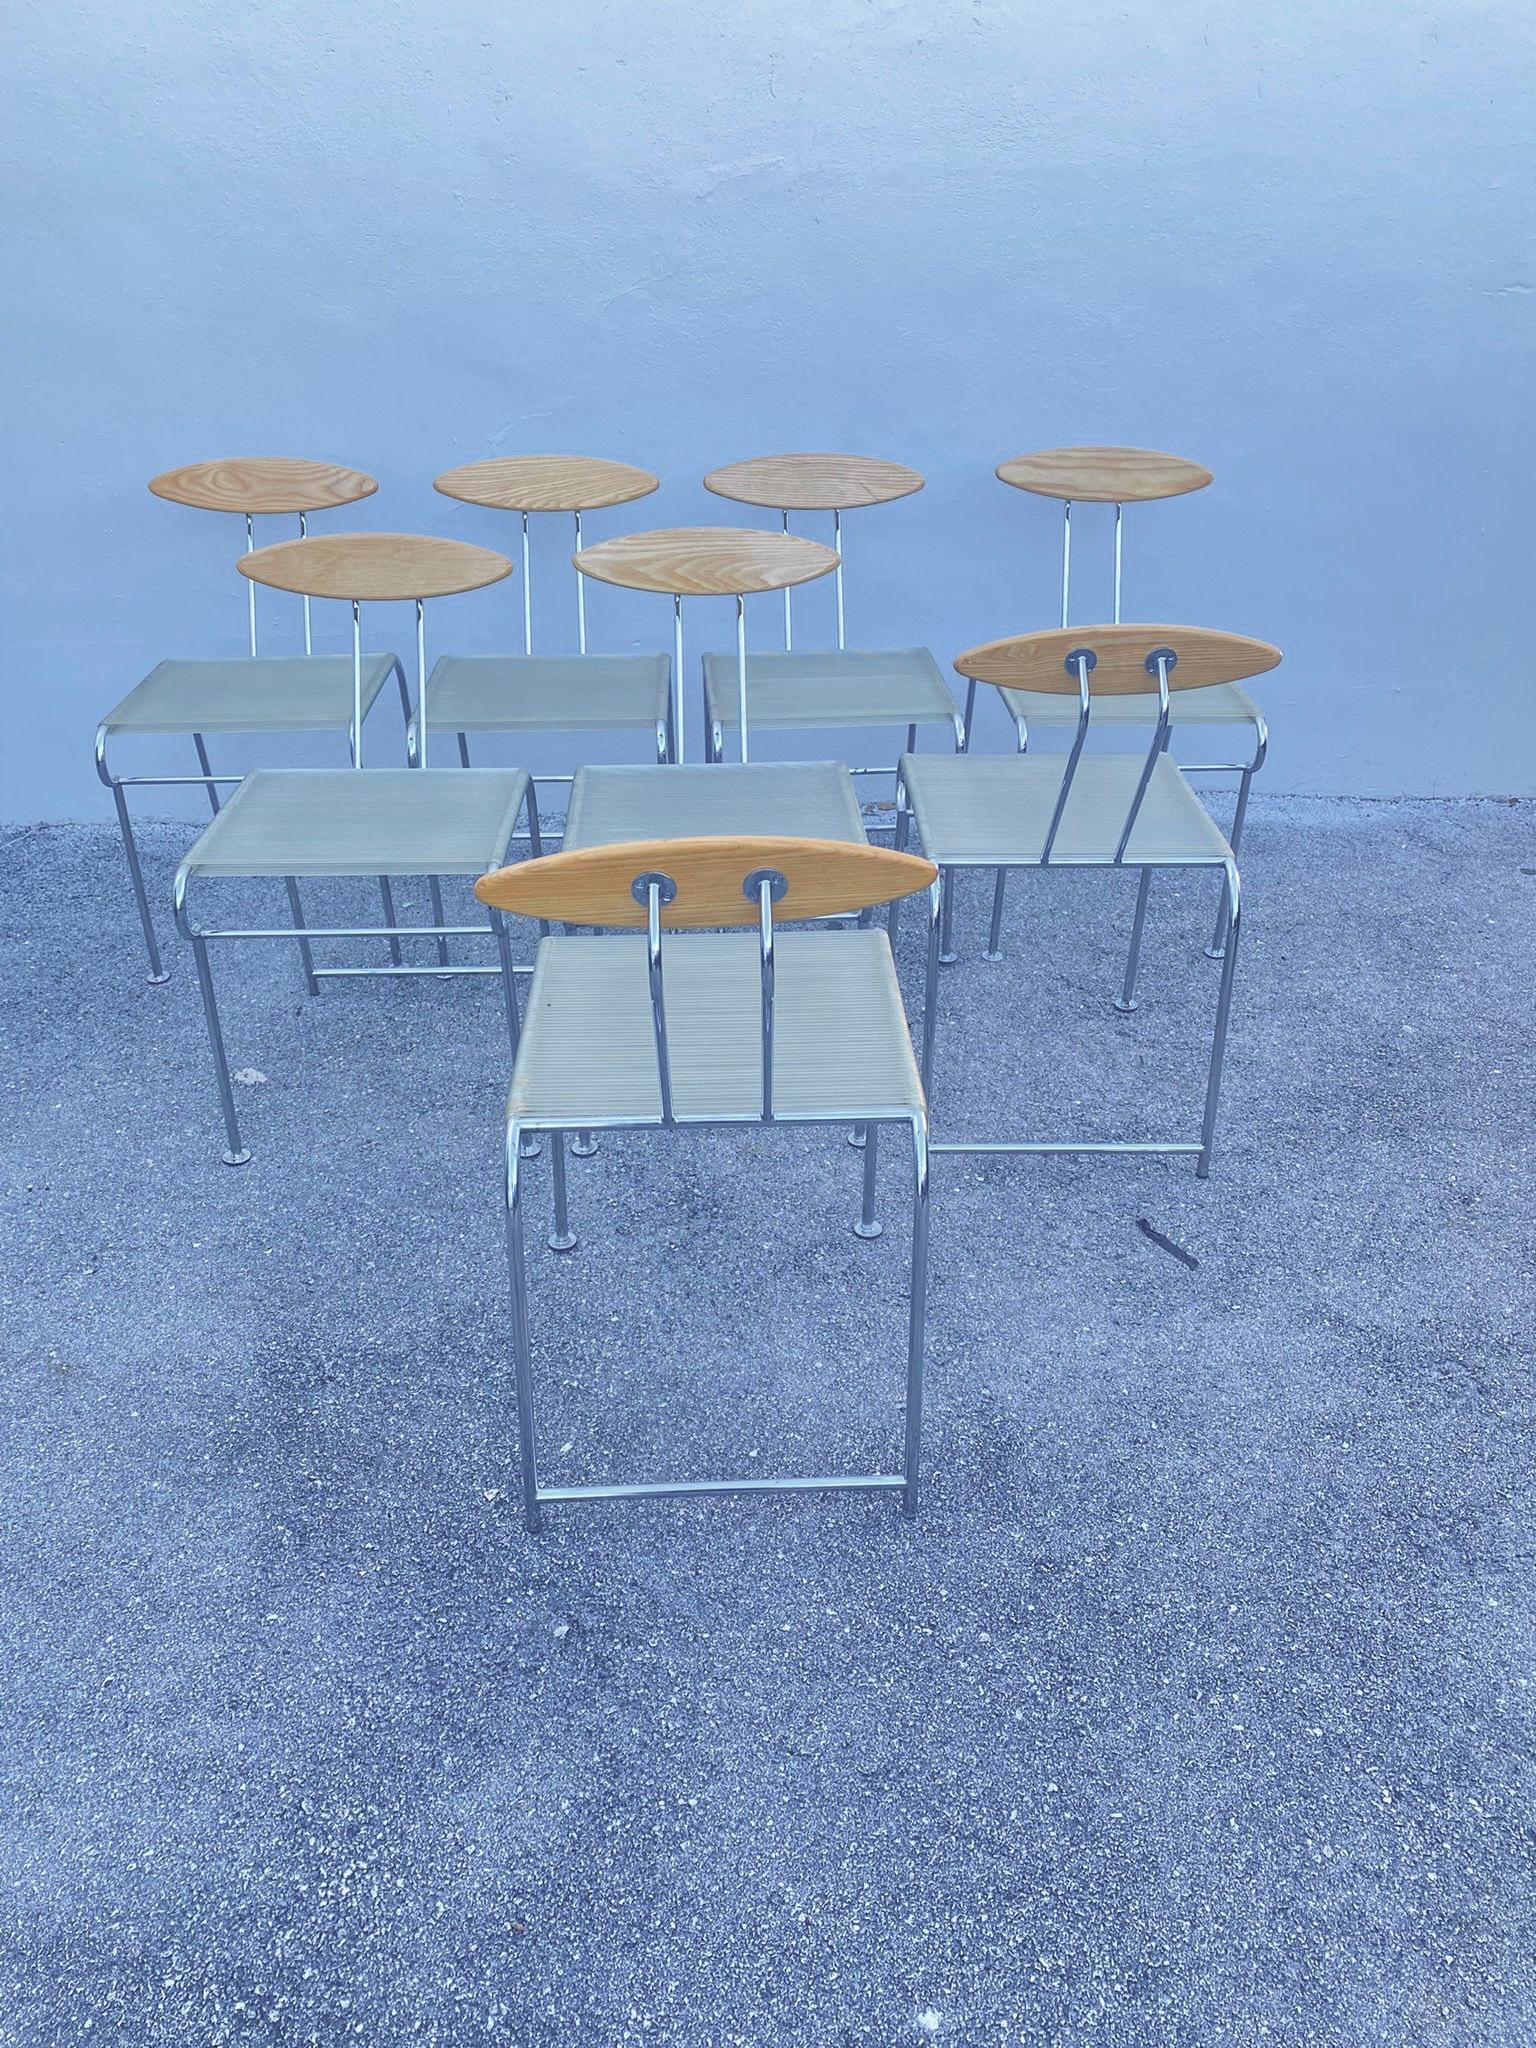 Postmodern Memphis style vintage dining chair set designed by Massimo Iosa Ghini for Moroso circa 1987 Italy. Made of metal, ashwood and clear elastic rubber strands. A RARE group of 8 dining chairs with solid ashwood backrests in elliptical shape